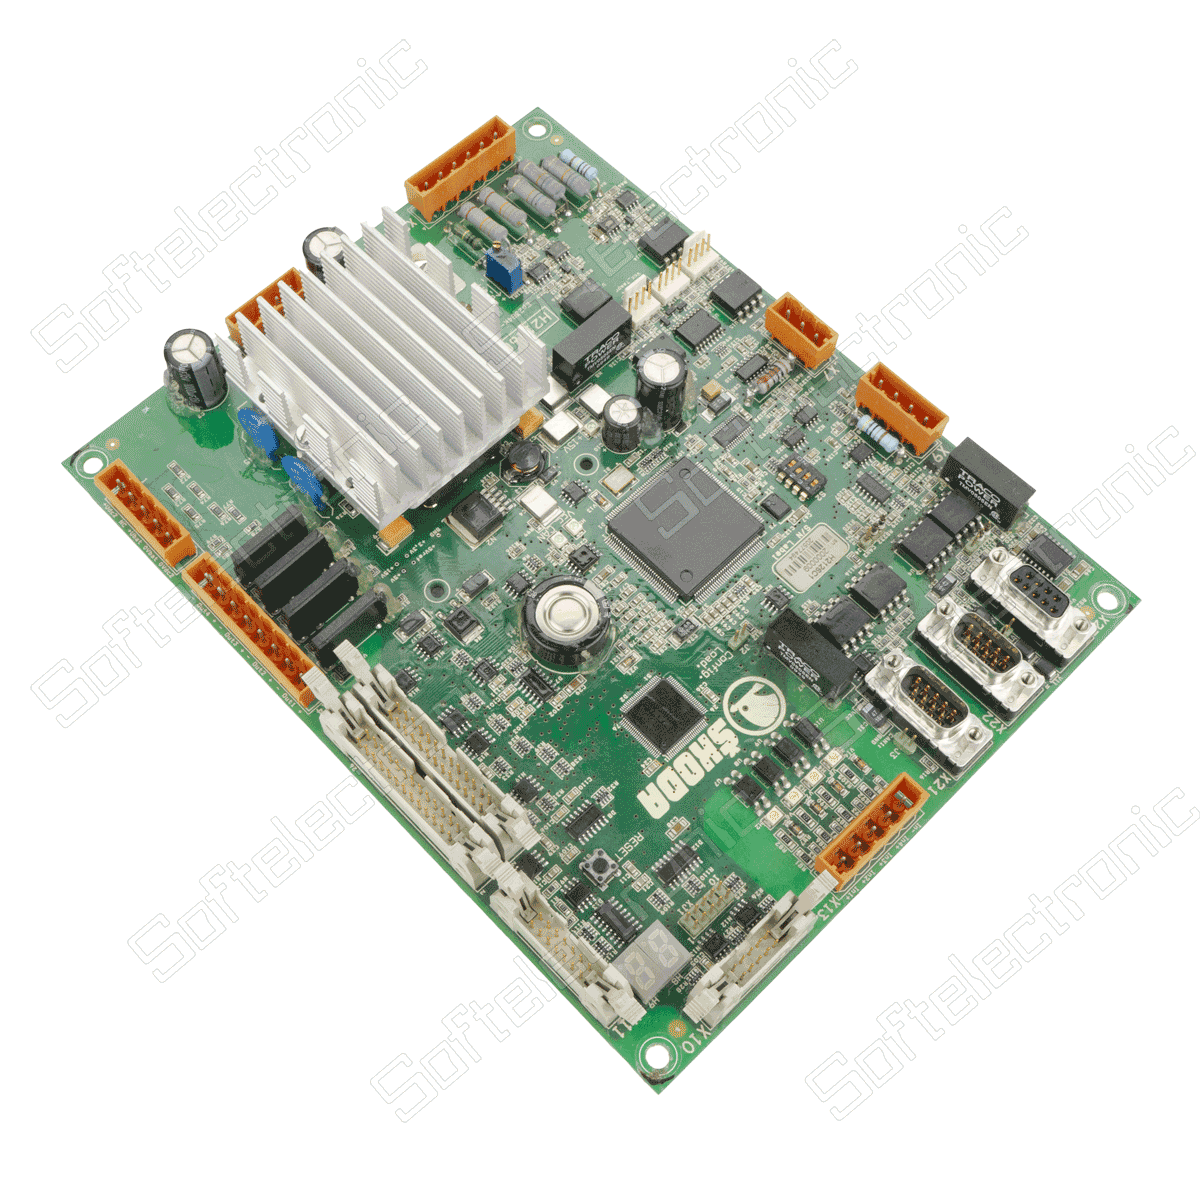 Repair of Skoda Auxiliary Systems Control Board H2126C1